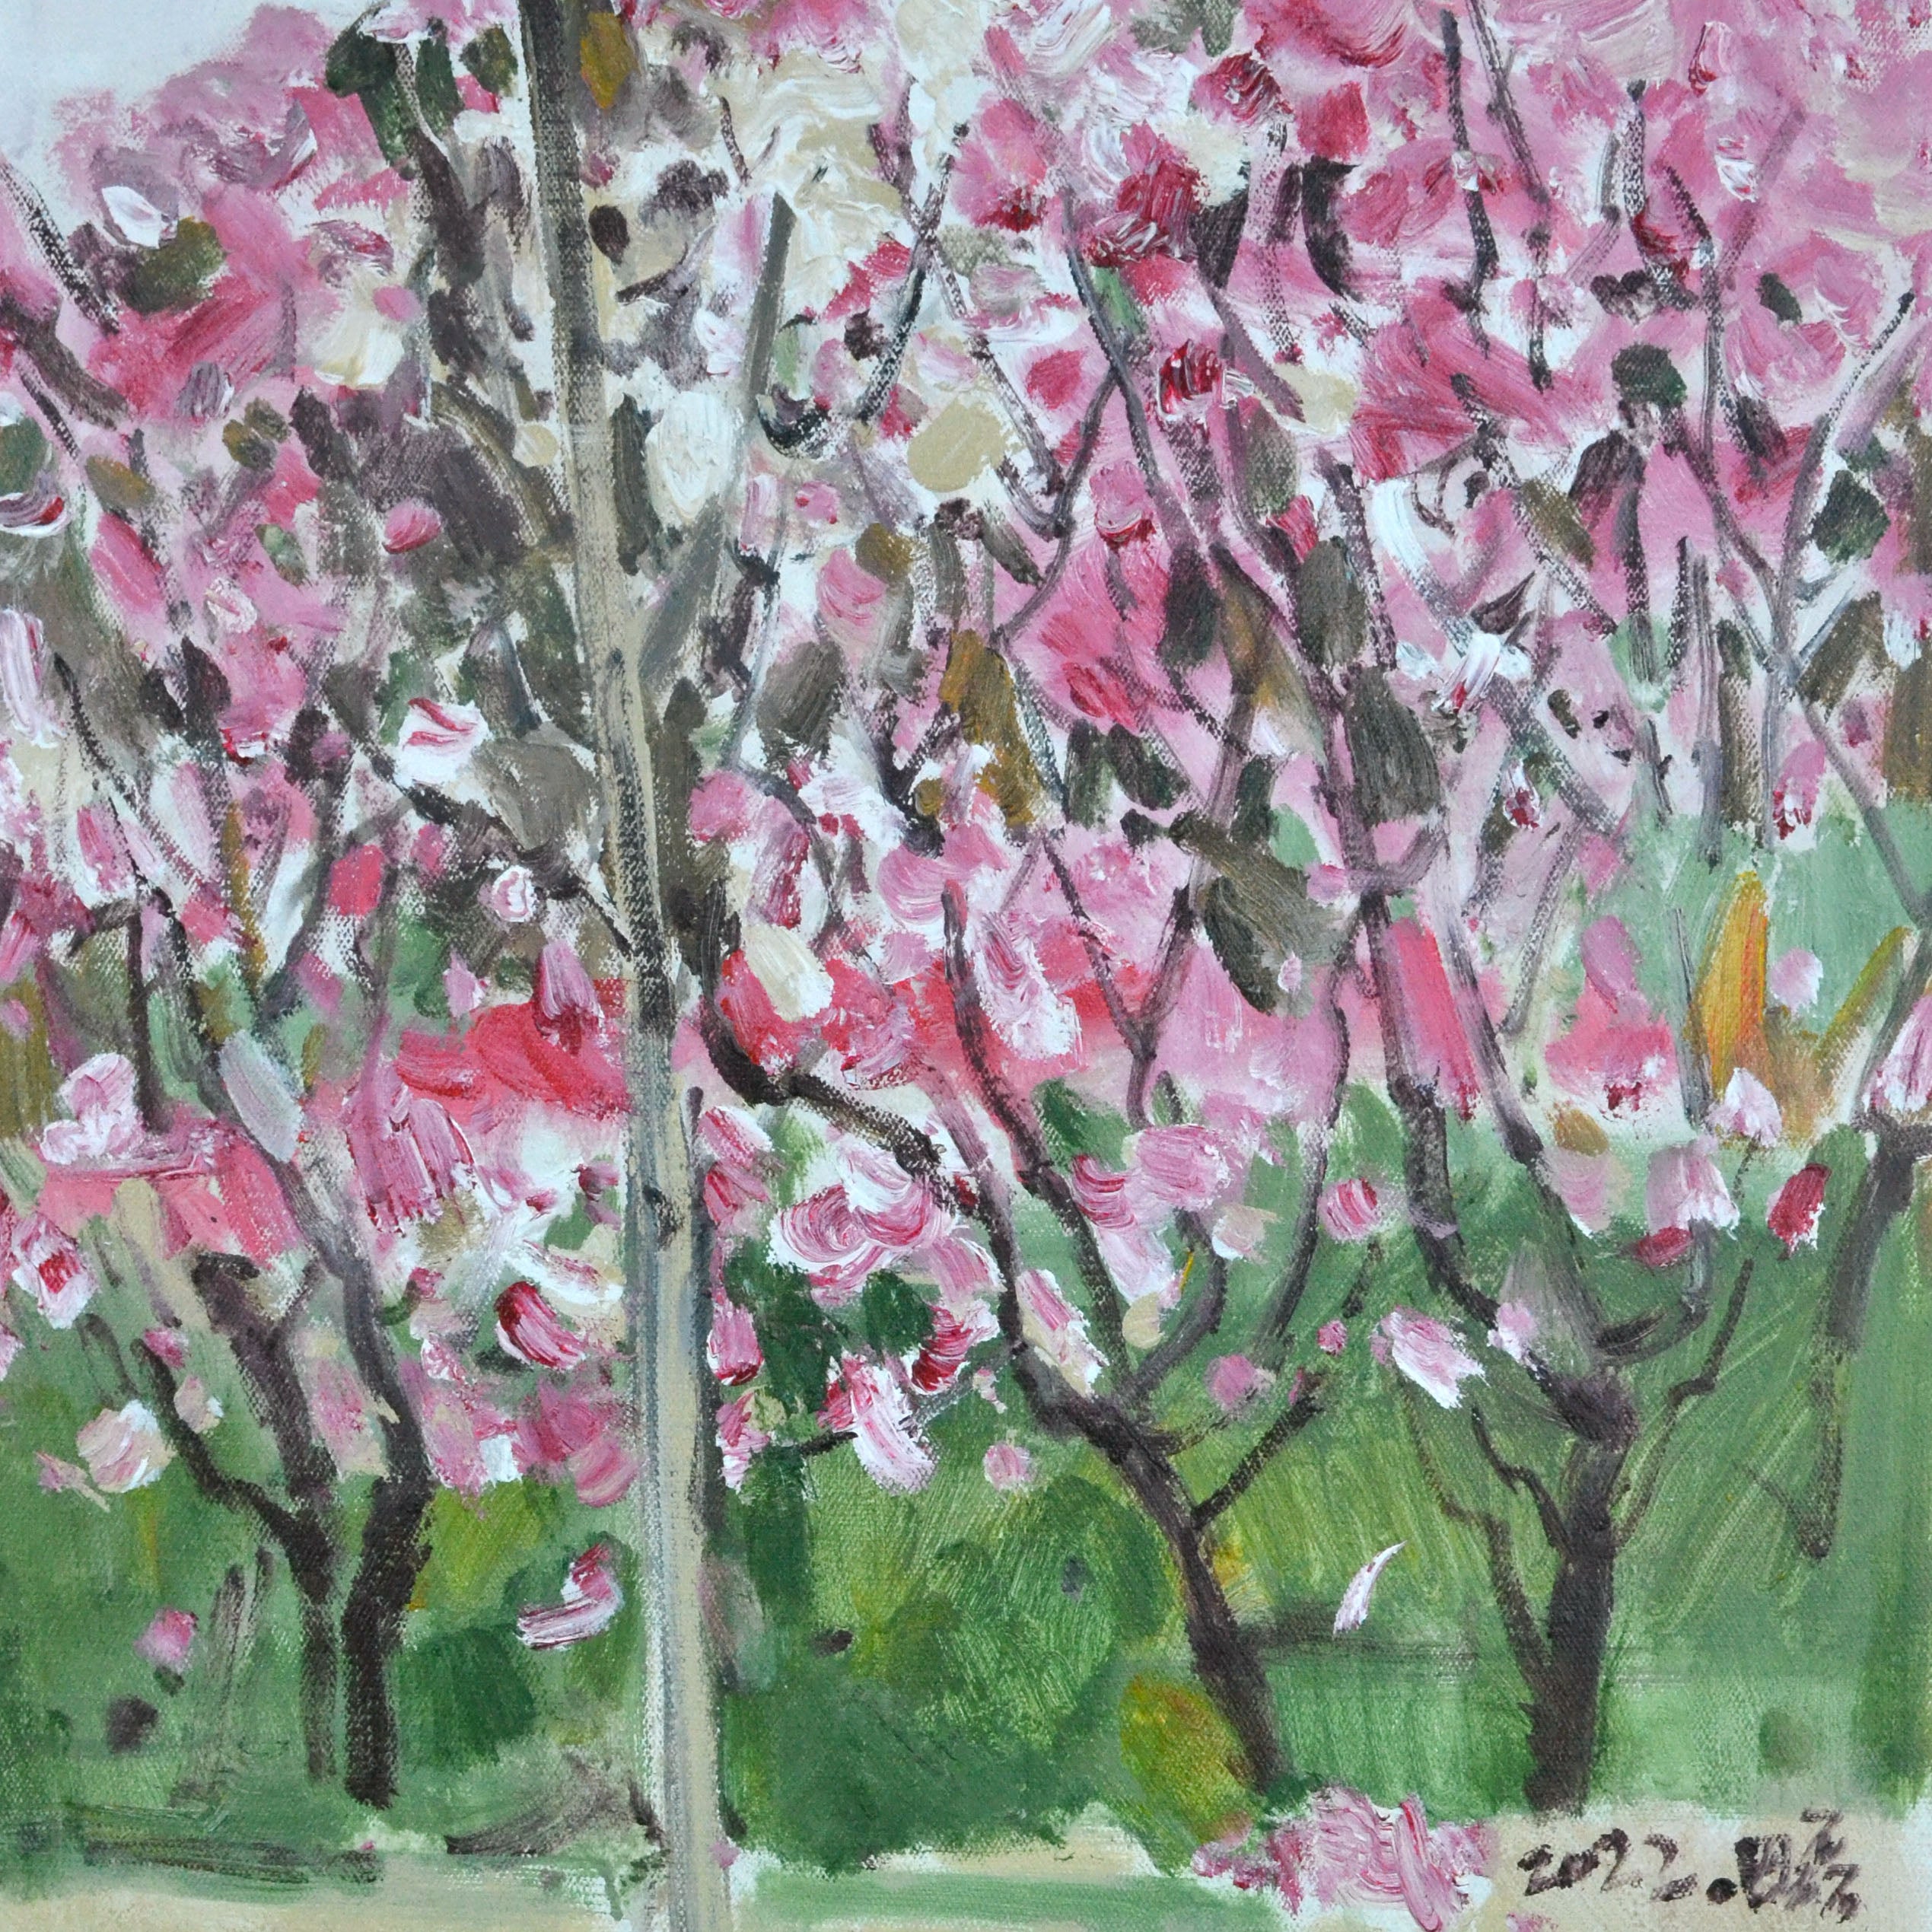 Abstract Oil Painting ”Spring“ Canvas Acrylic 50*60cm - Morrow Land